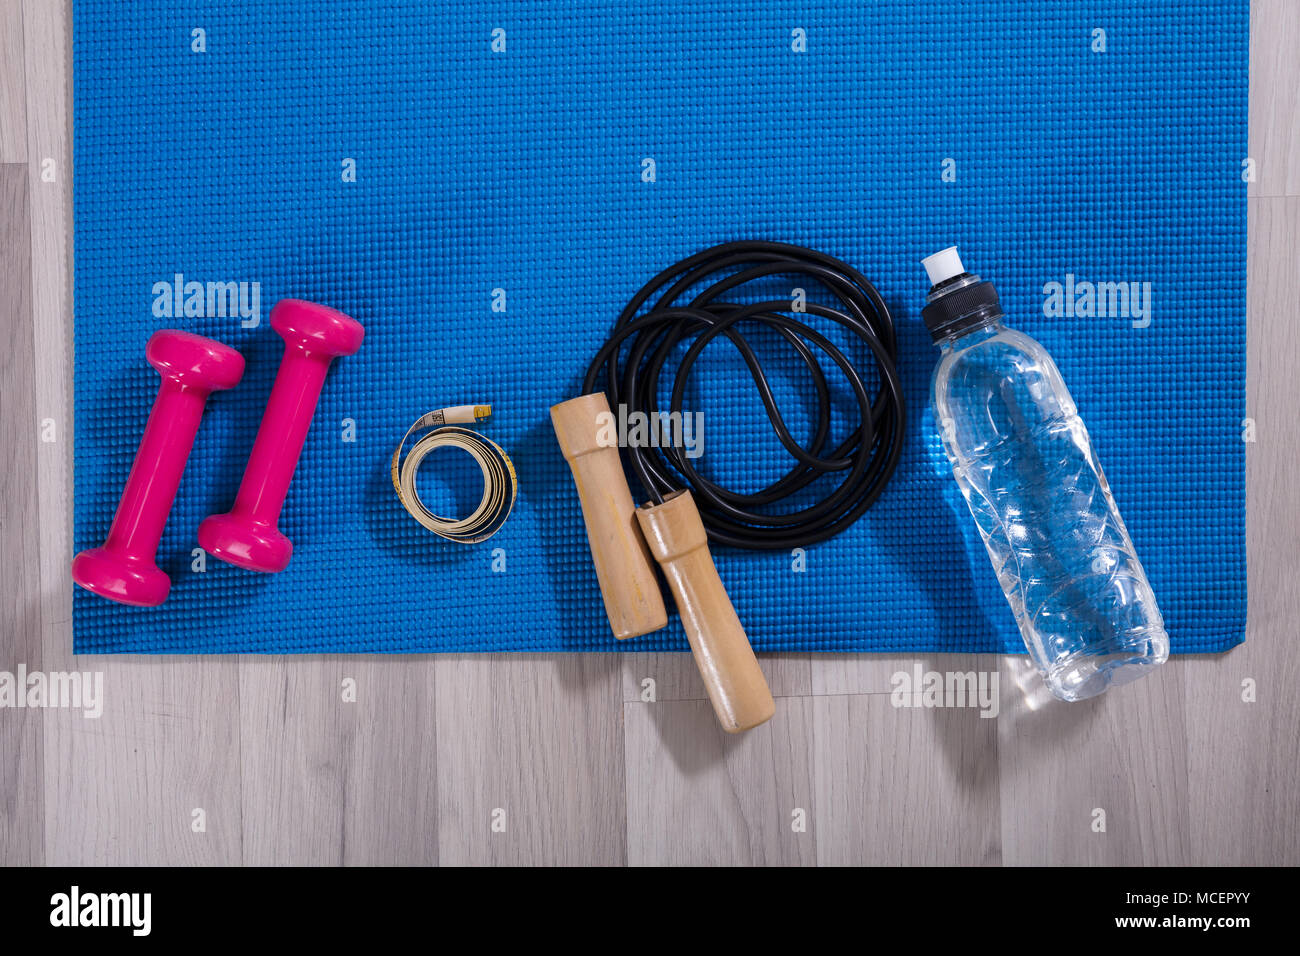 Elevated View Of Fitness Equipments On Blue Exercise Mat Stock Photo